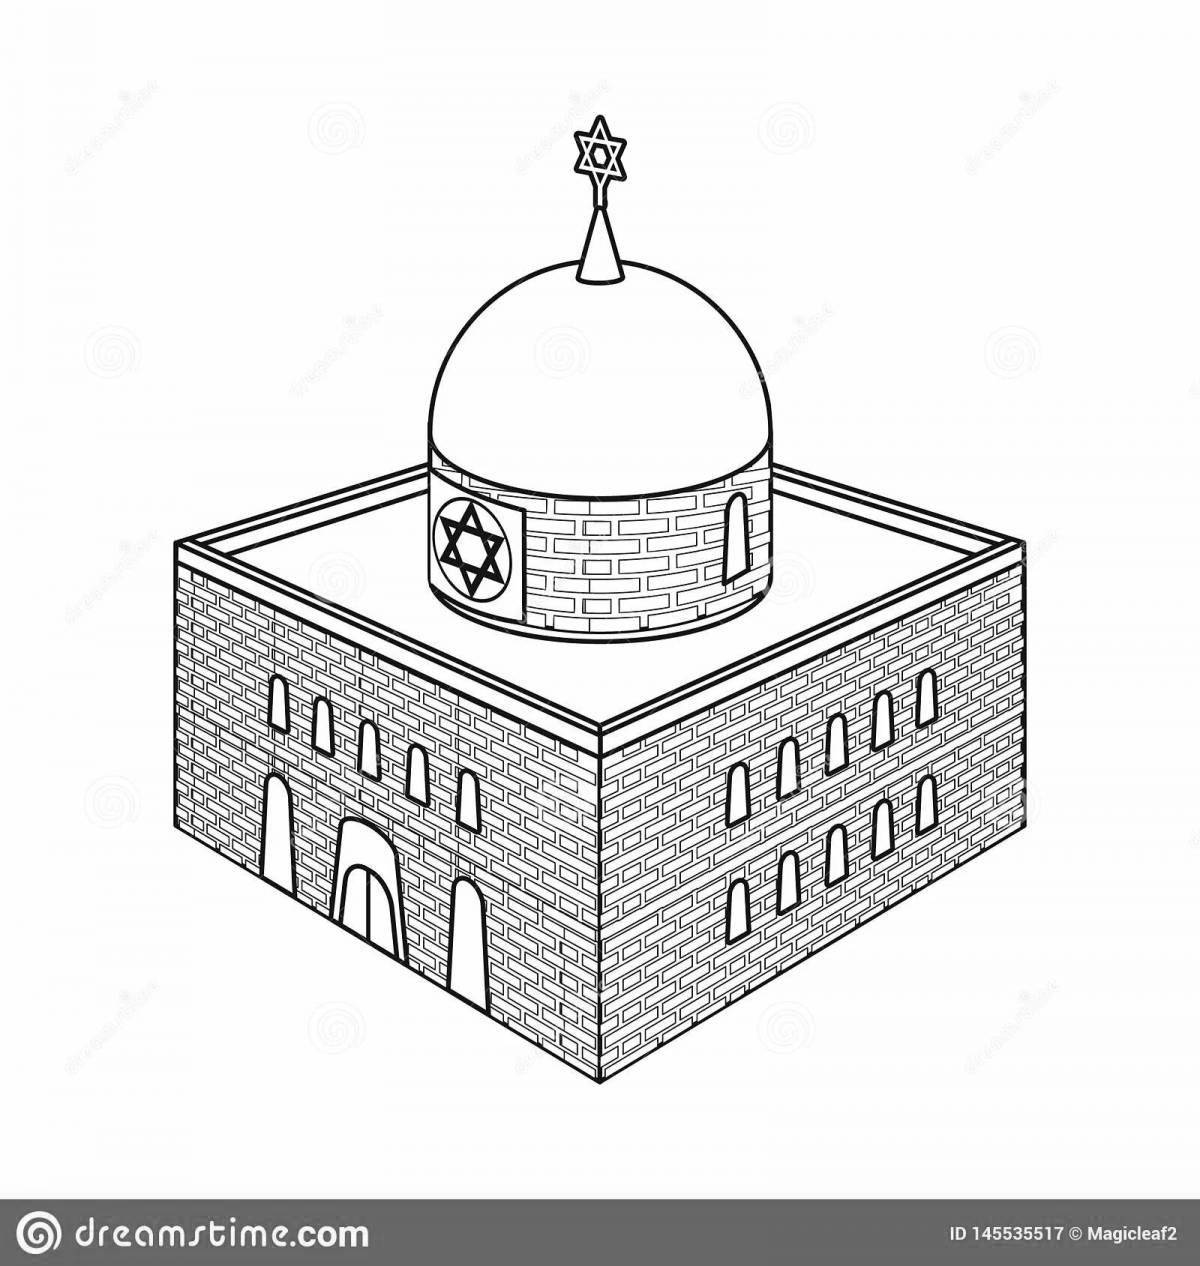 Awesome synagogue coloring page